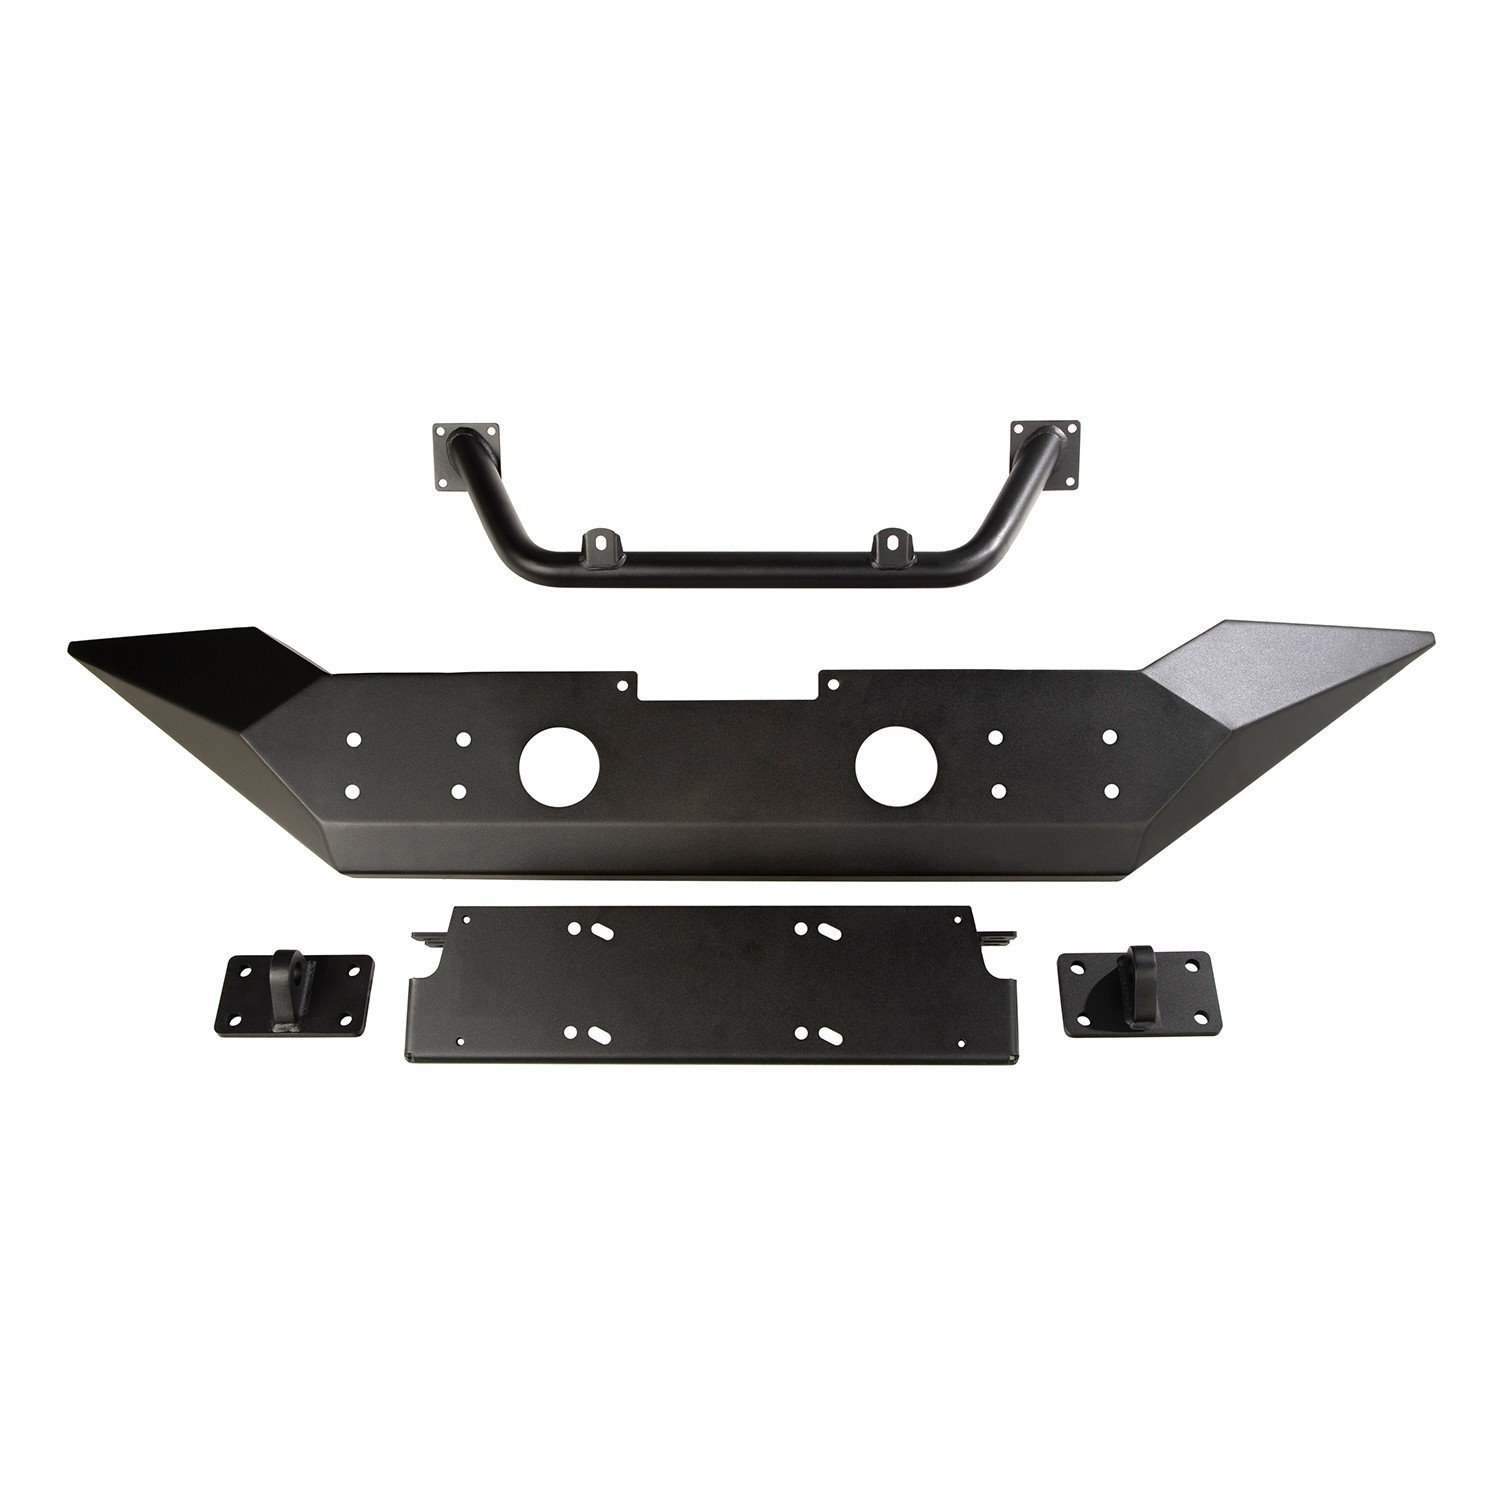 High Clearance Spartan Front Bumper for 2018-2019 Jeep Wrangler JL